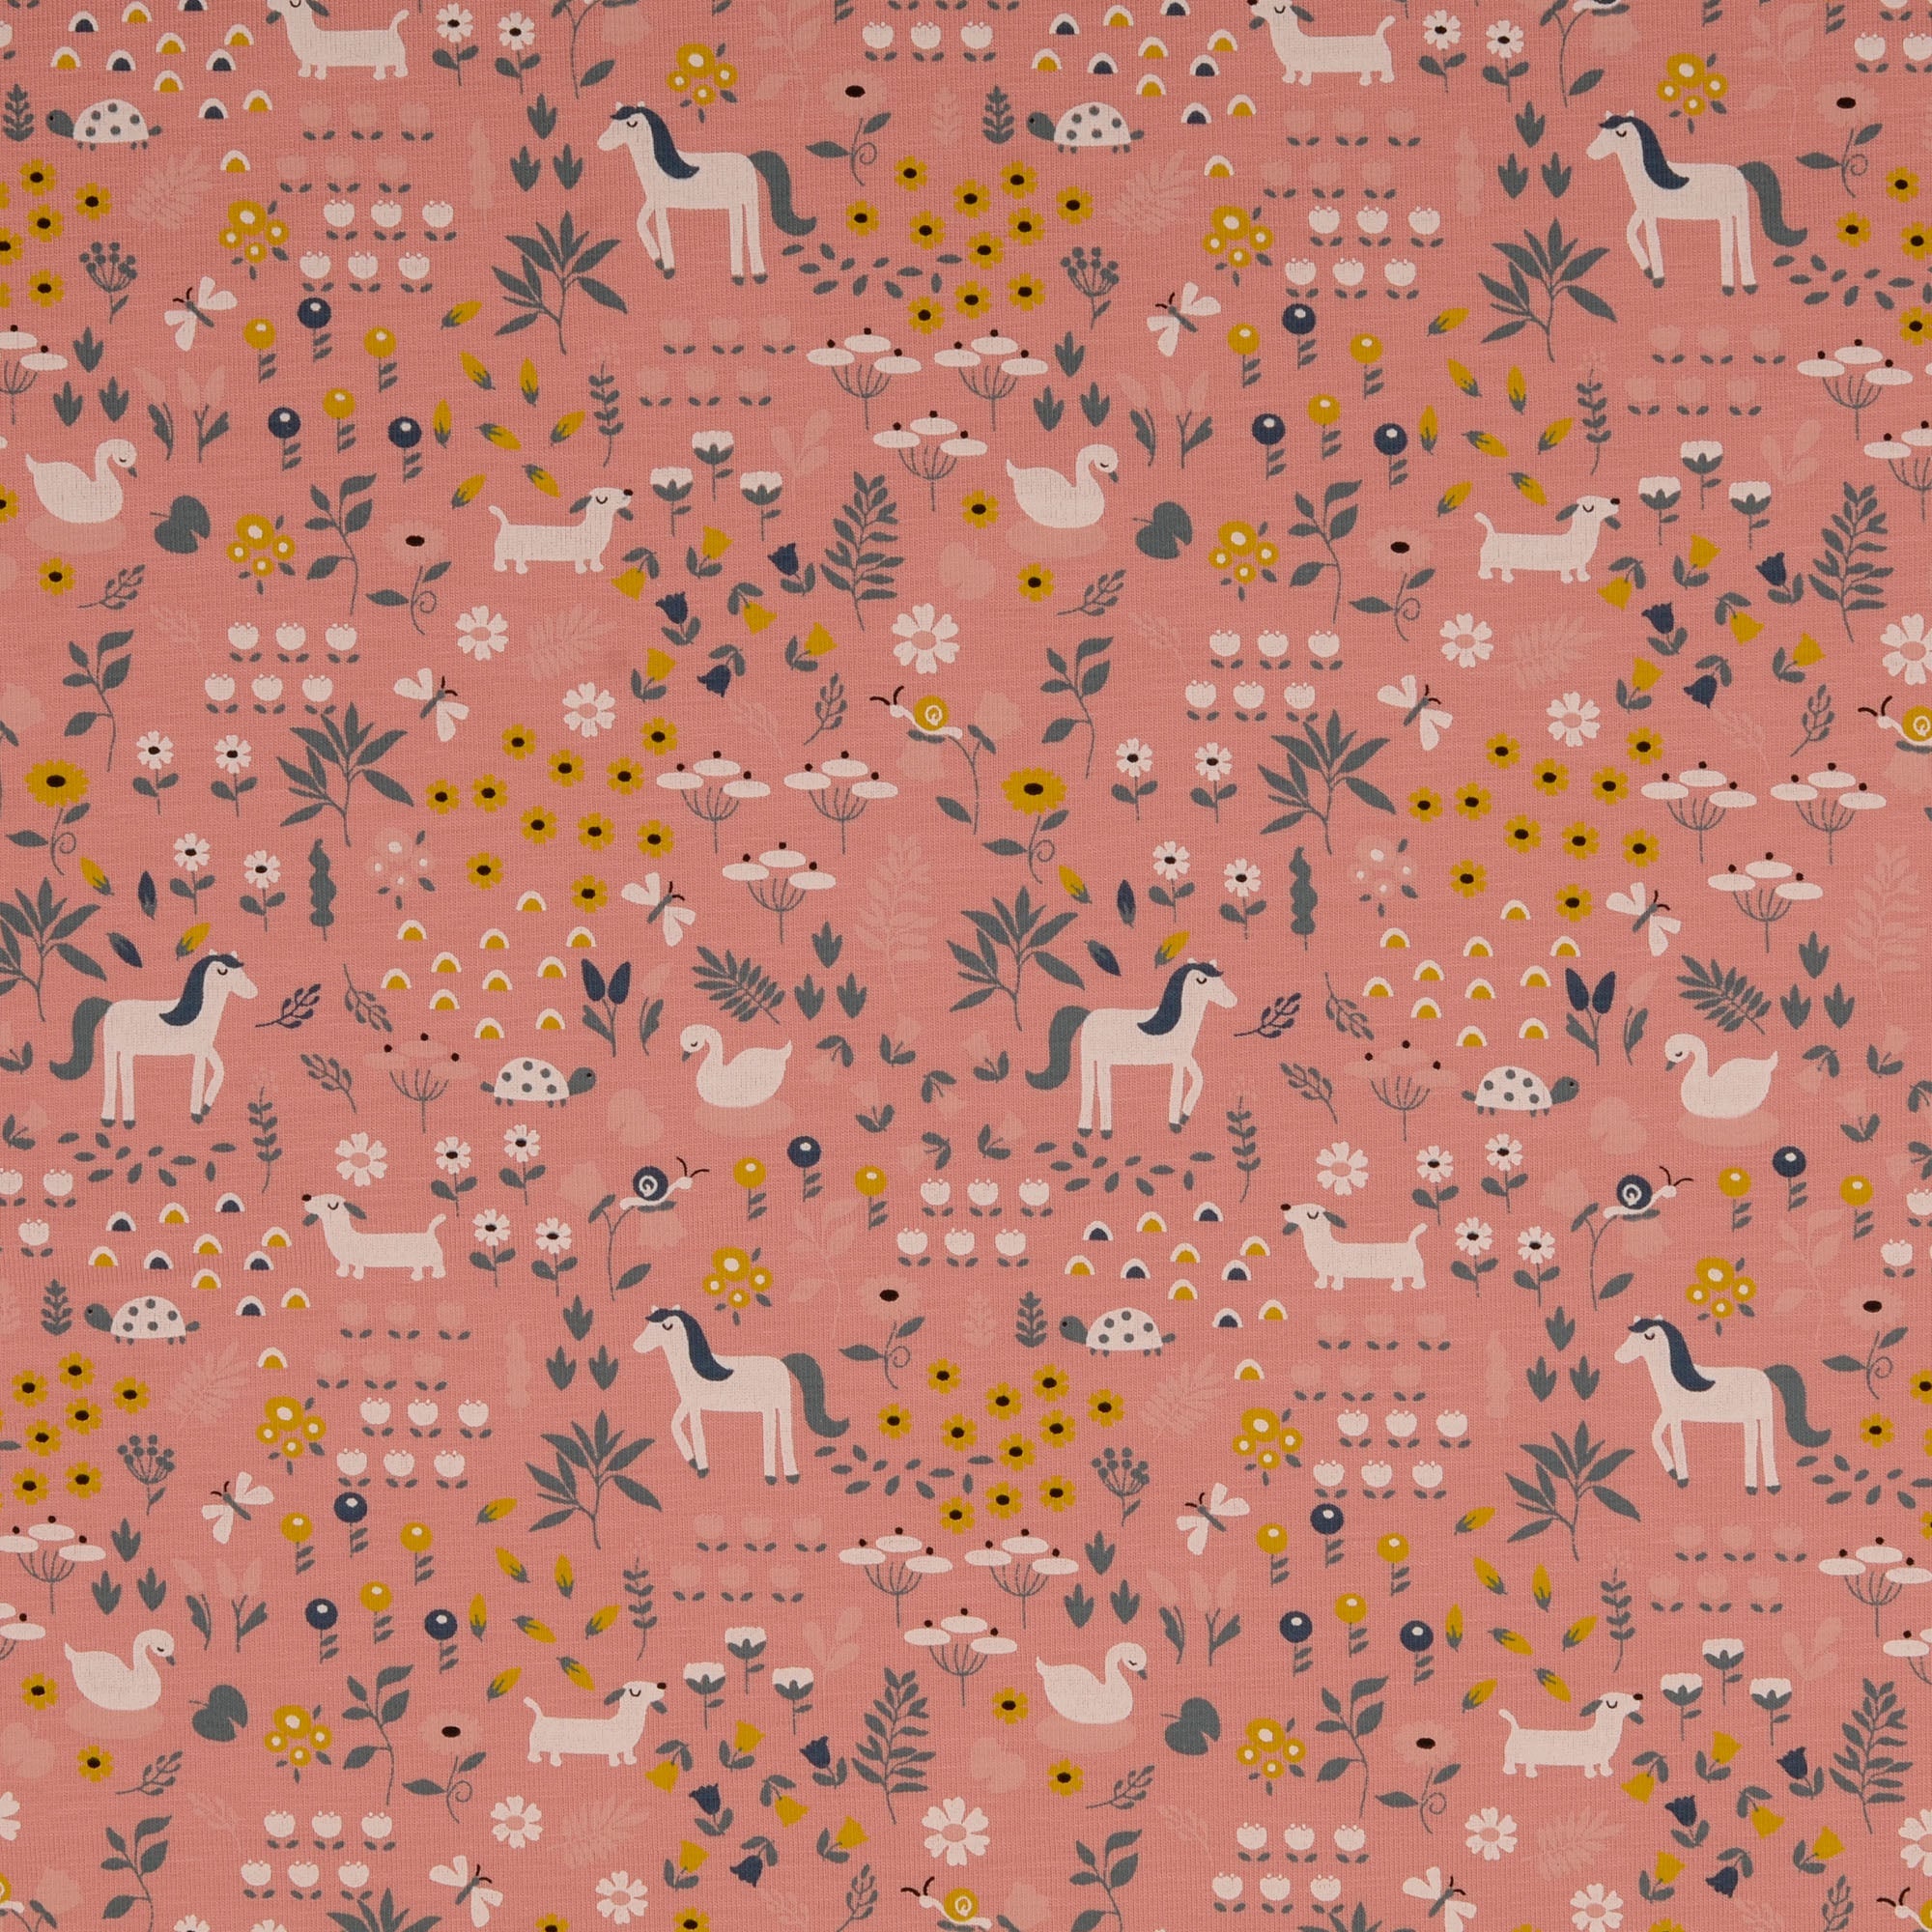 REMNANT 1.2 Metres - (Fault 2 inch hole with marks round) Animals Pink Organic Cotton Jersey Fabric